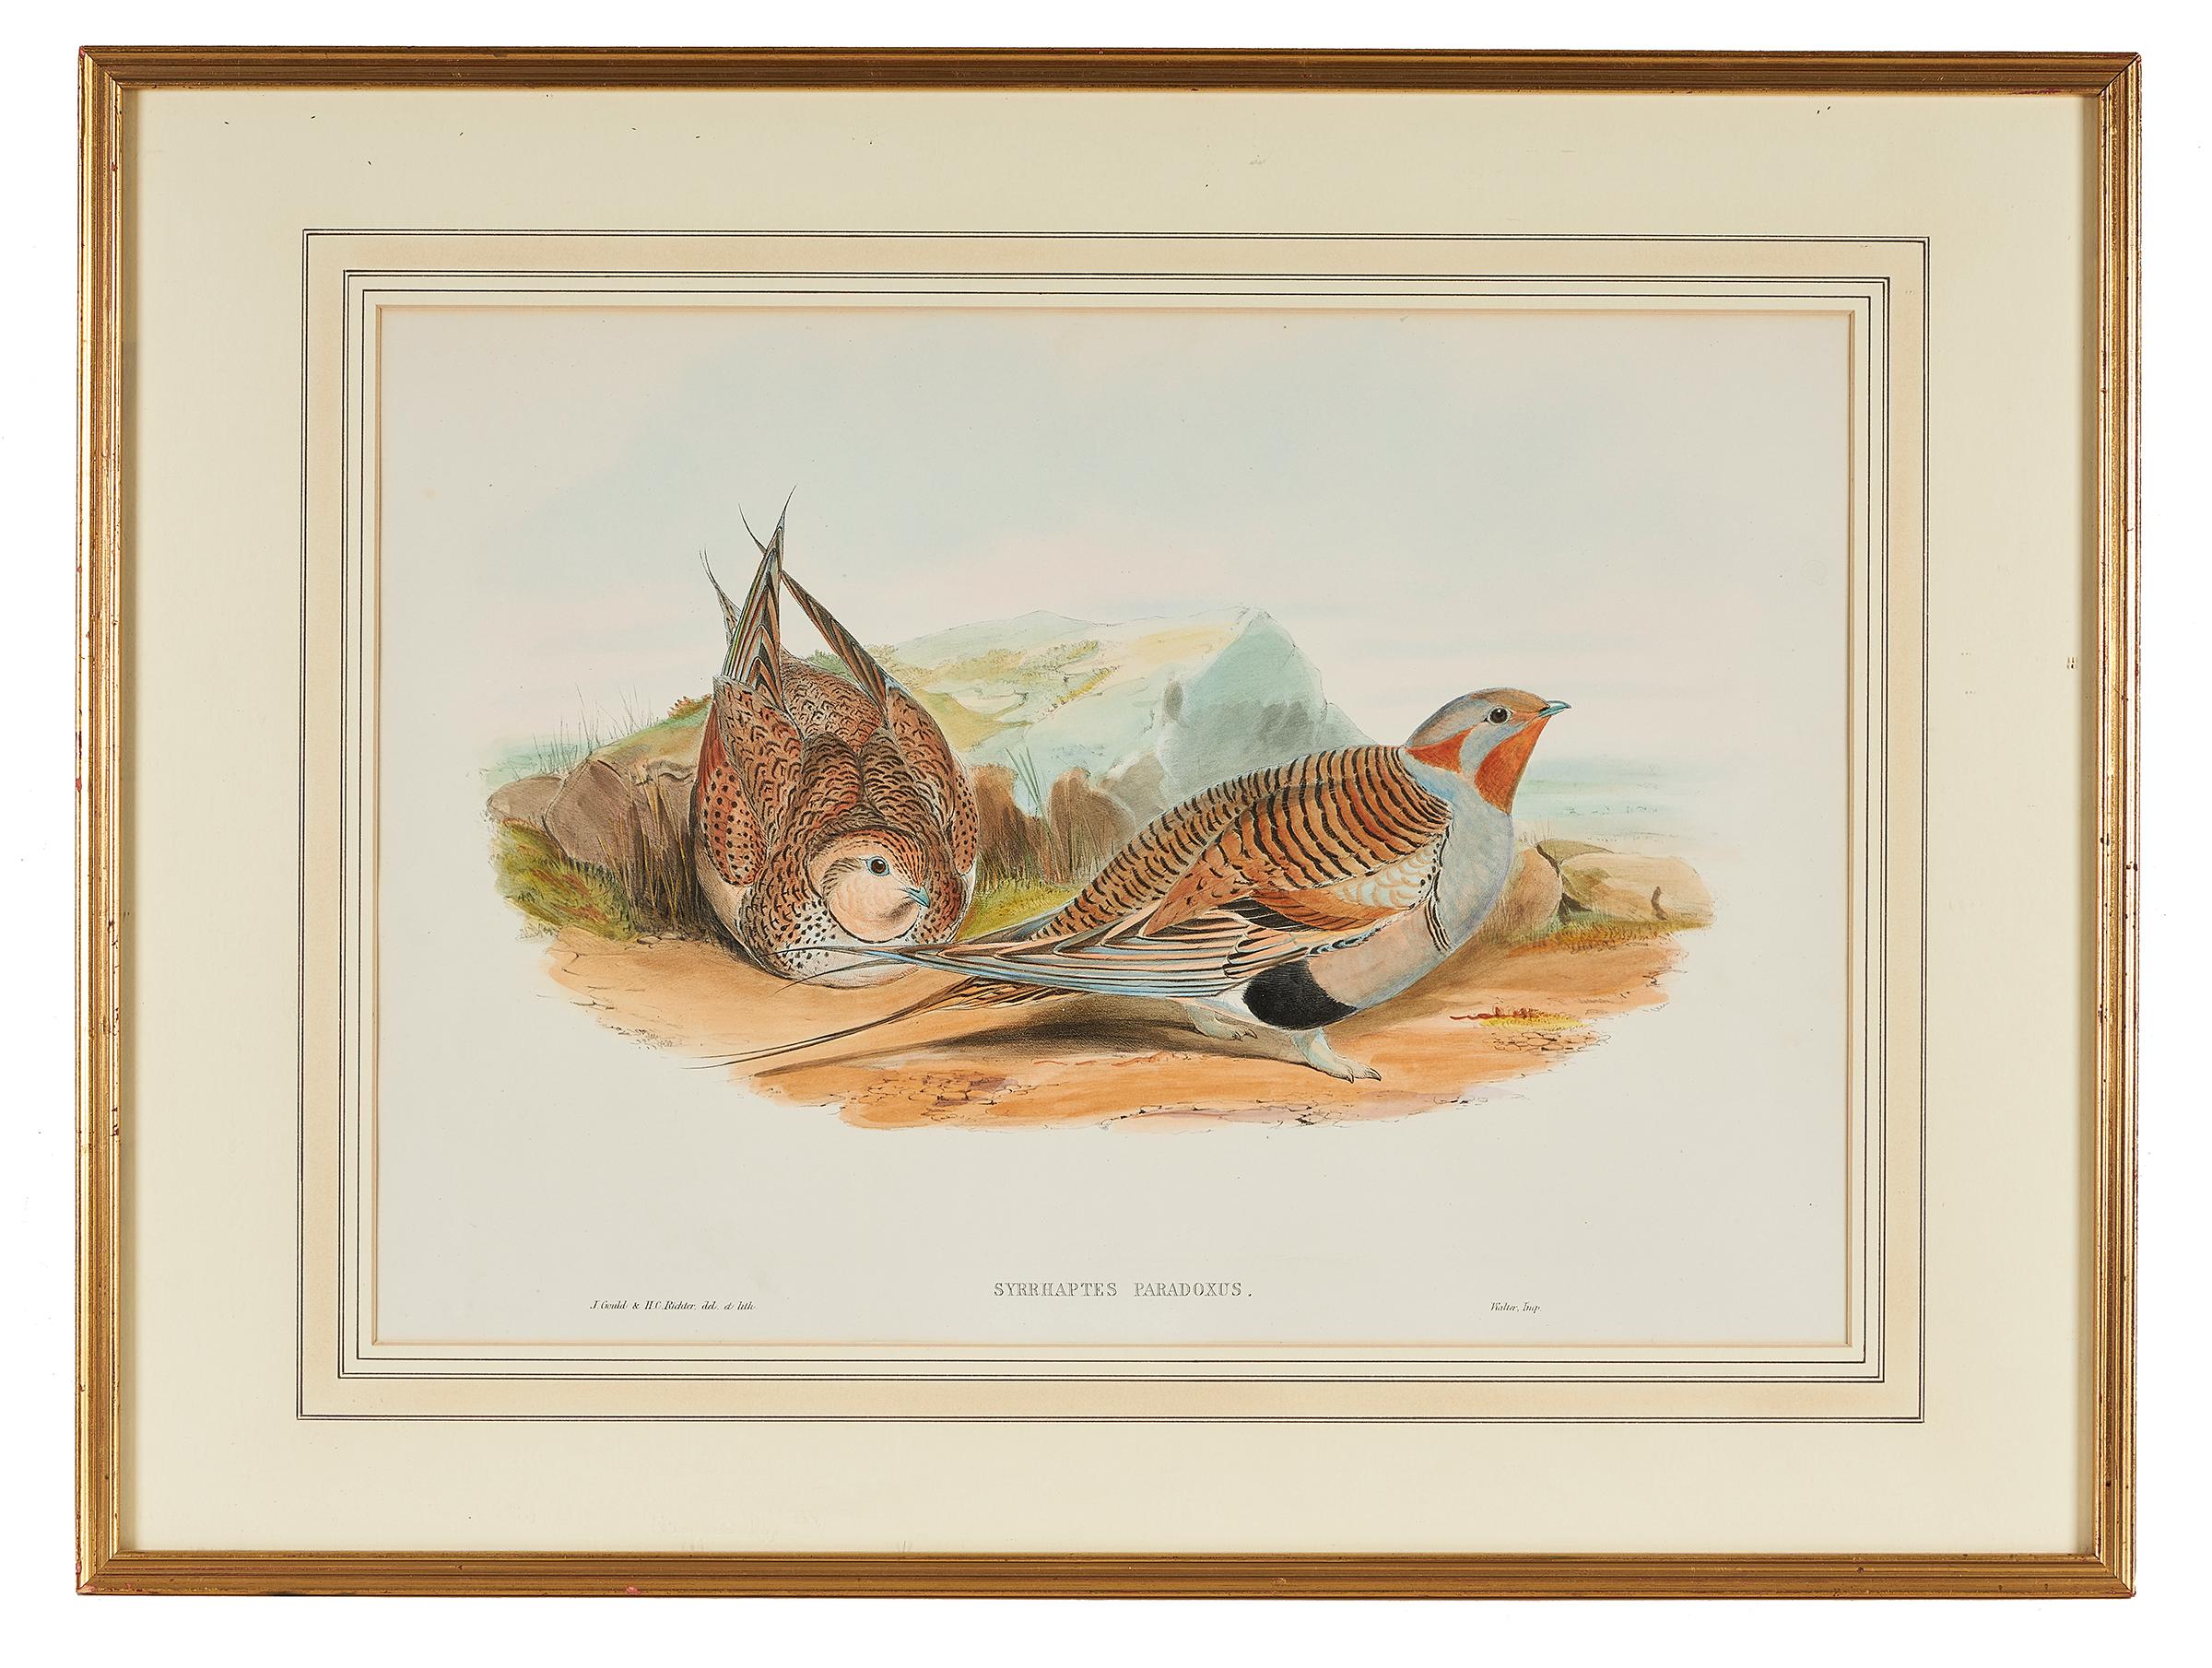 John Gould (English, 1804-1881), 'Syrrhaptes Paradoxus', Pallas Sand Grouse, 1863, hand colored lithograph from the book 